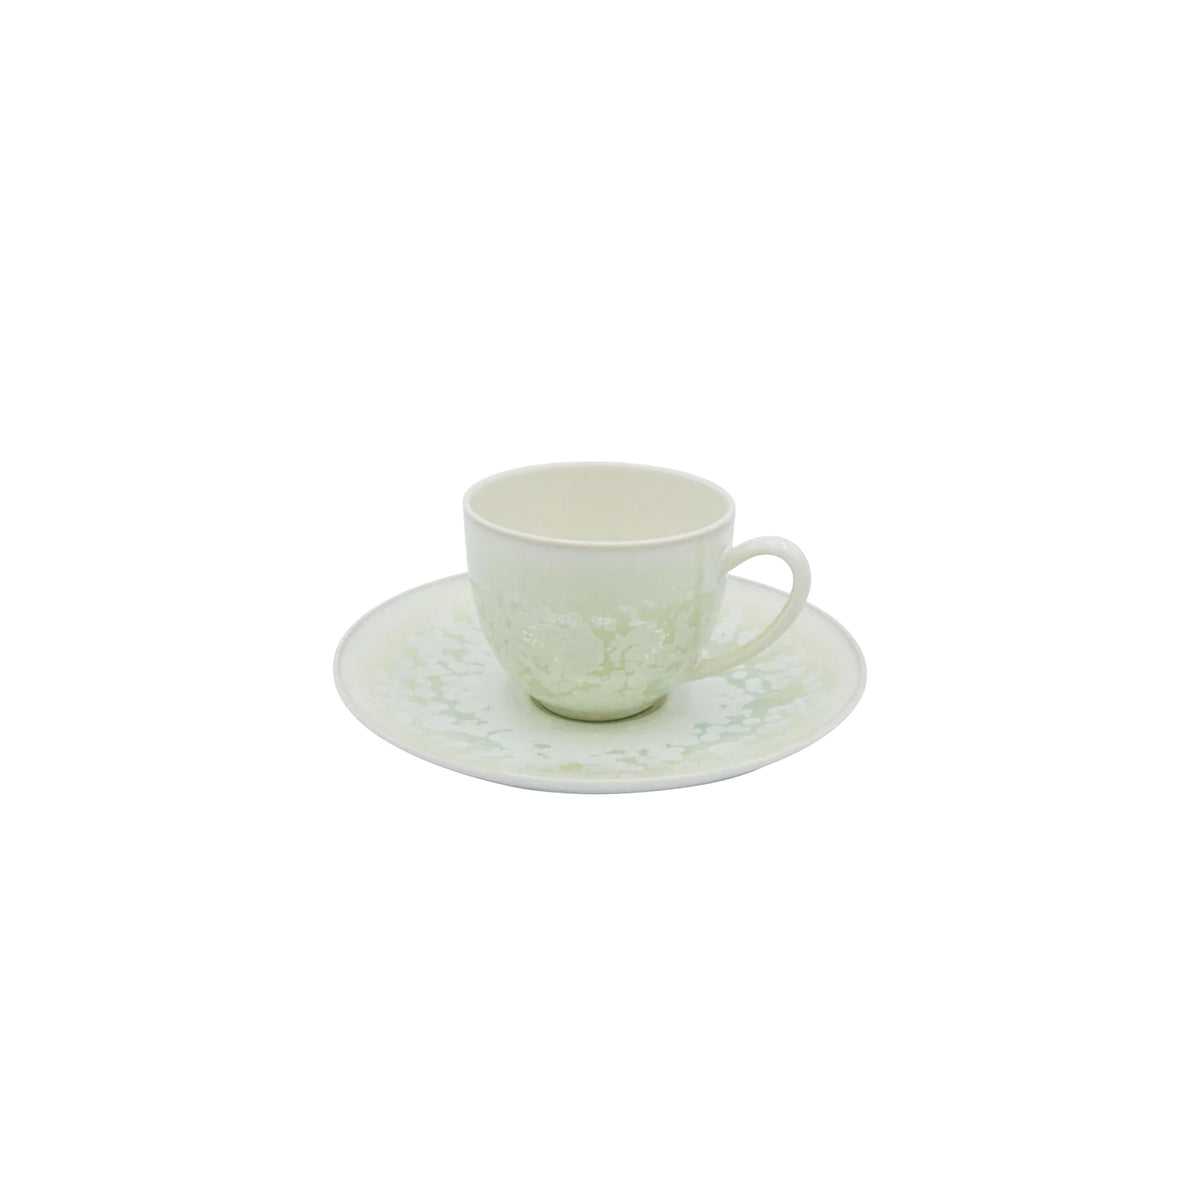 SONG Almond - Coffee set (cup & saucer)